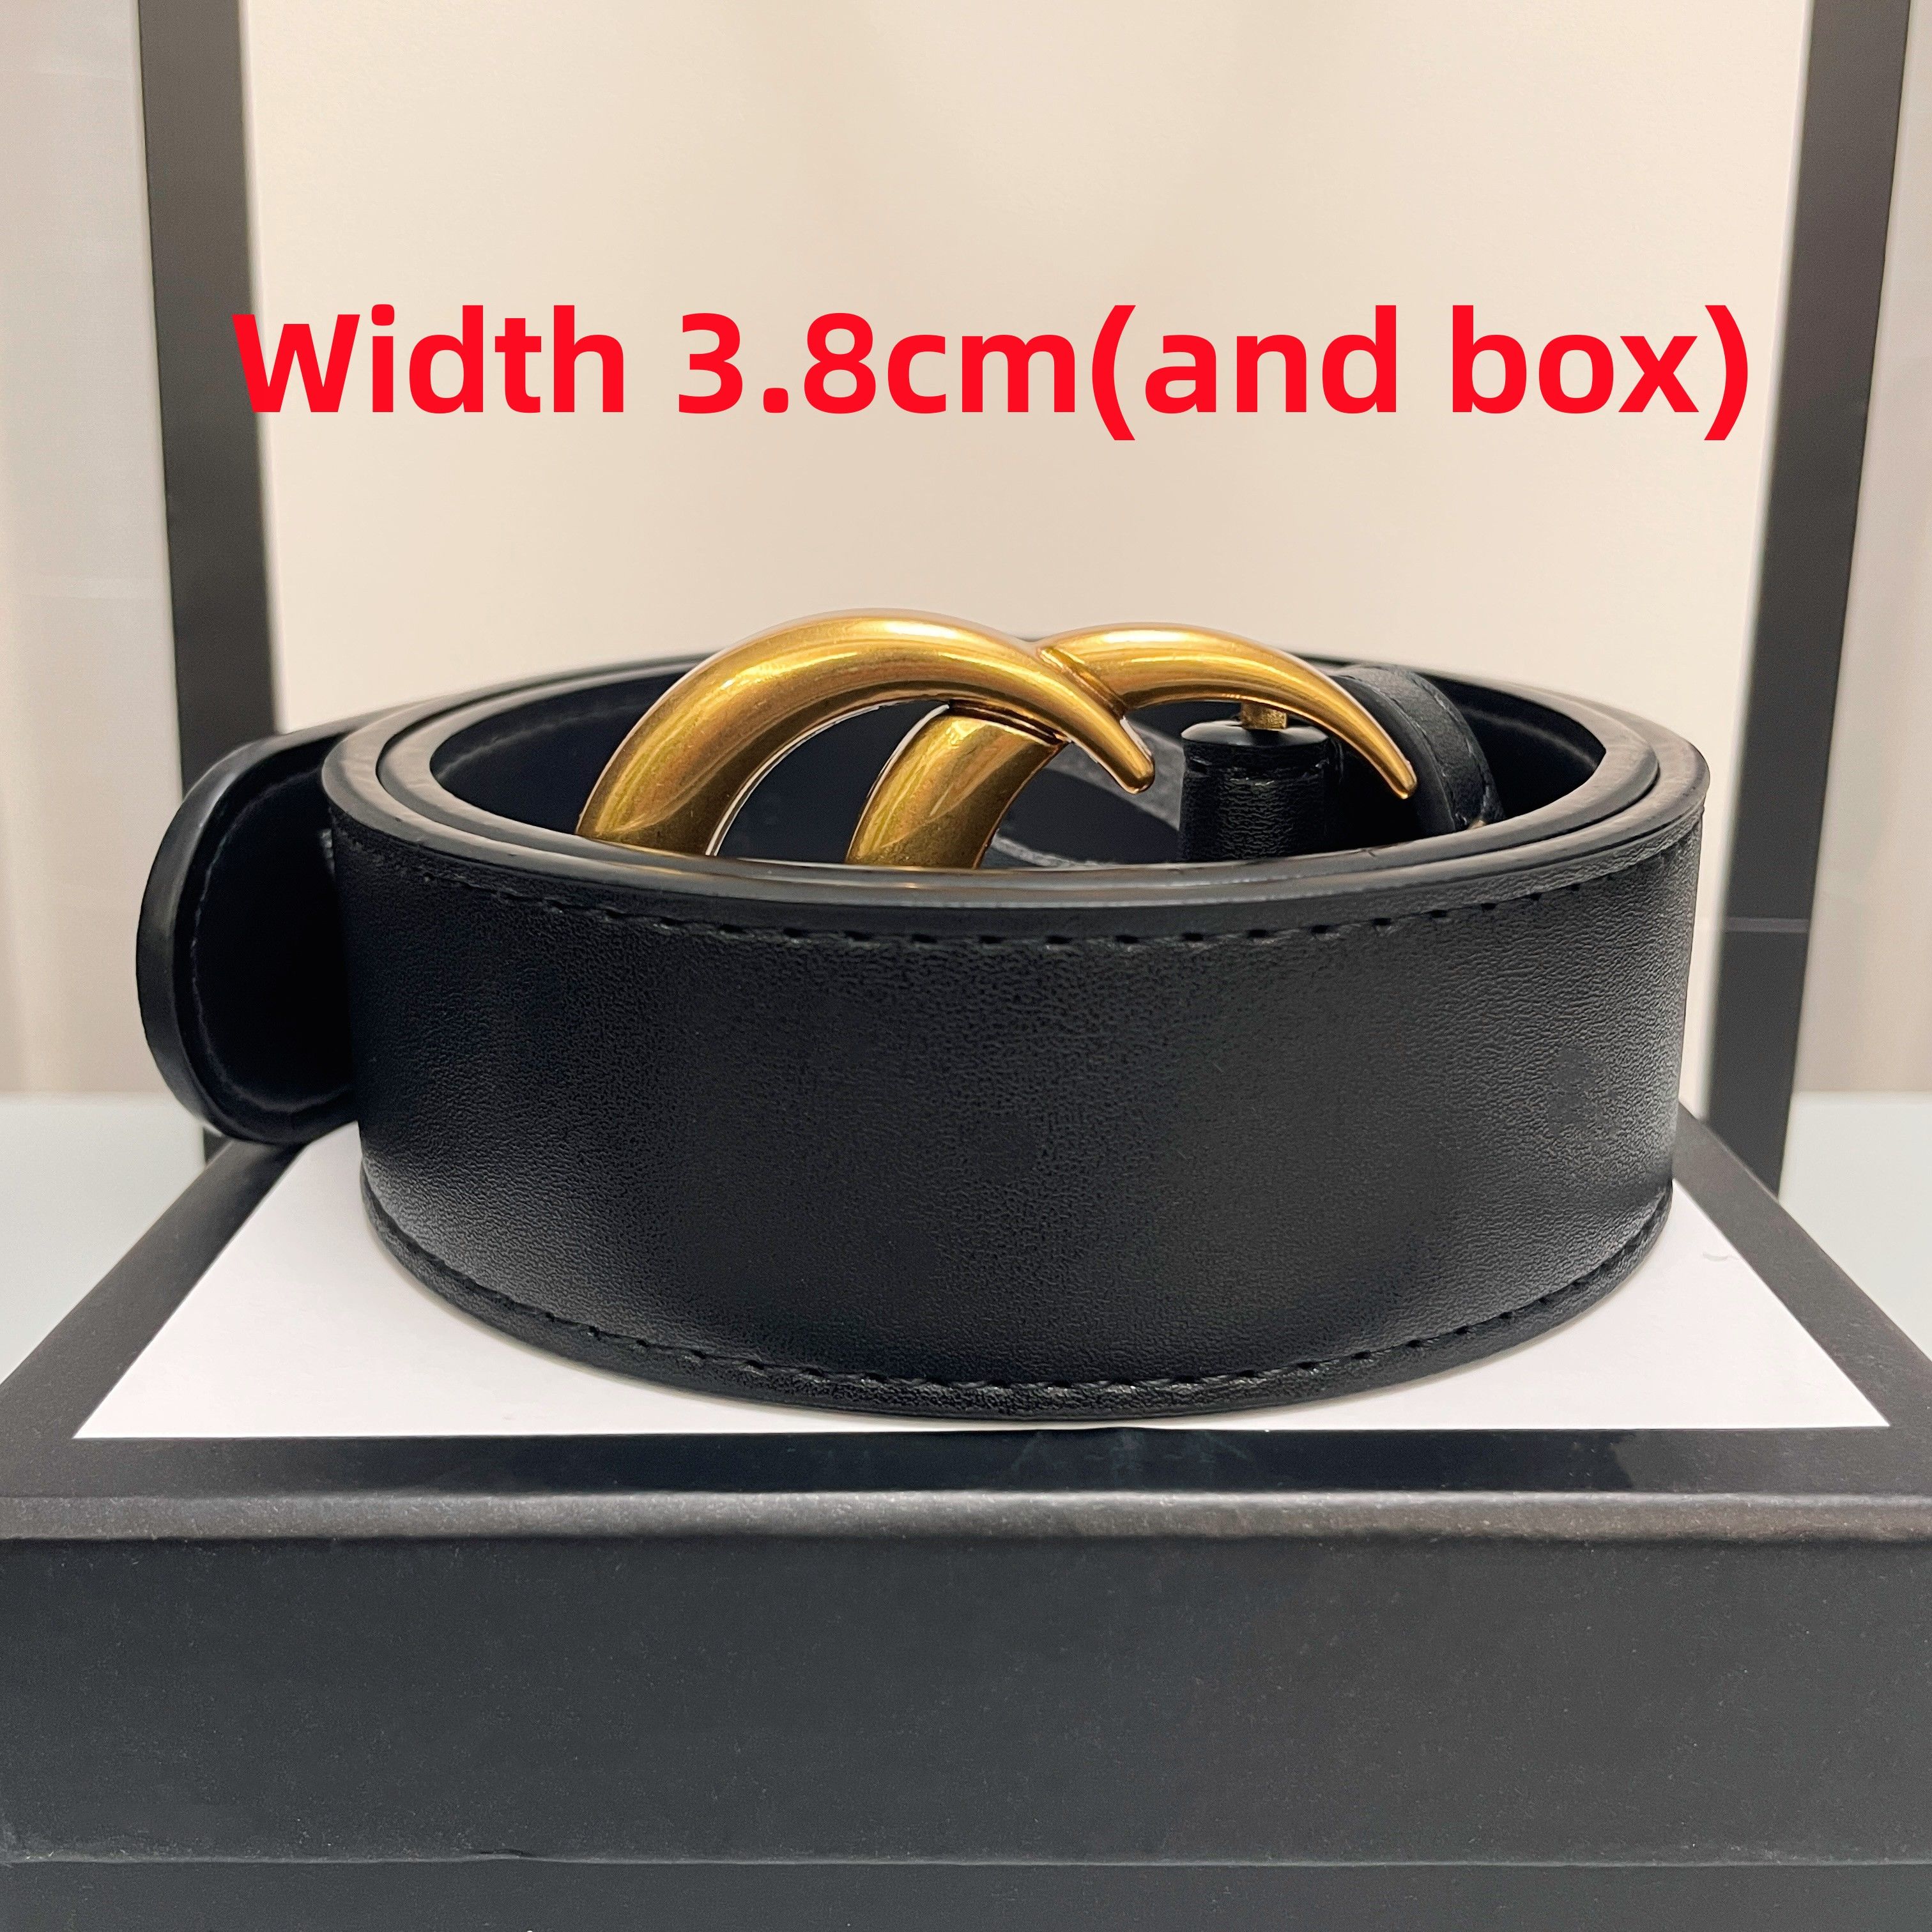 Width 3.8cm(And box)